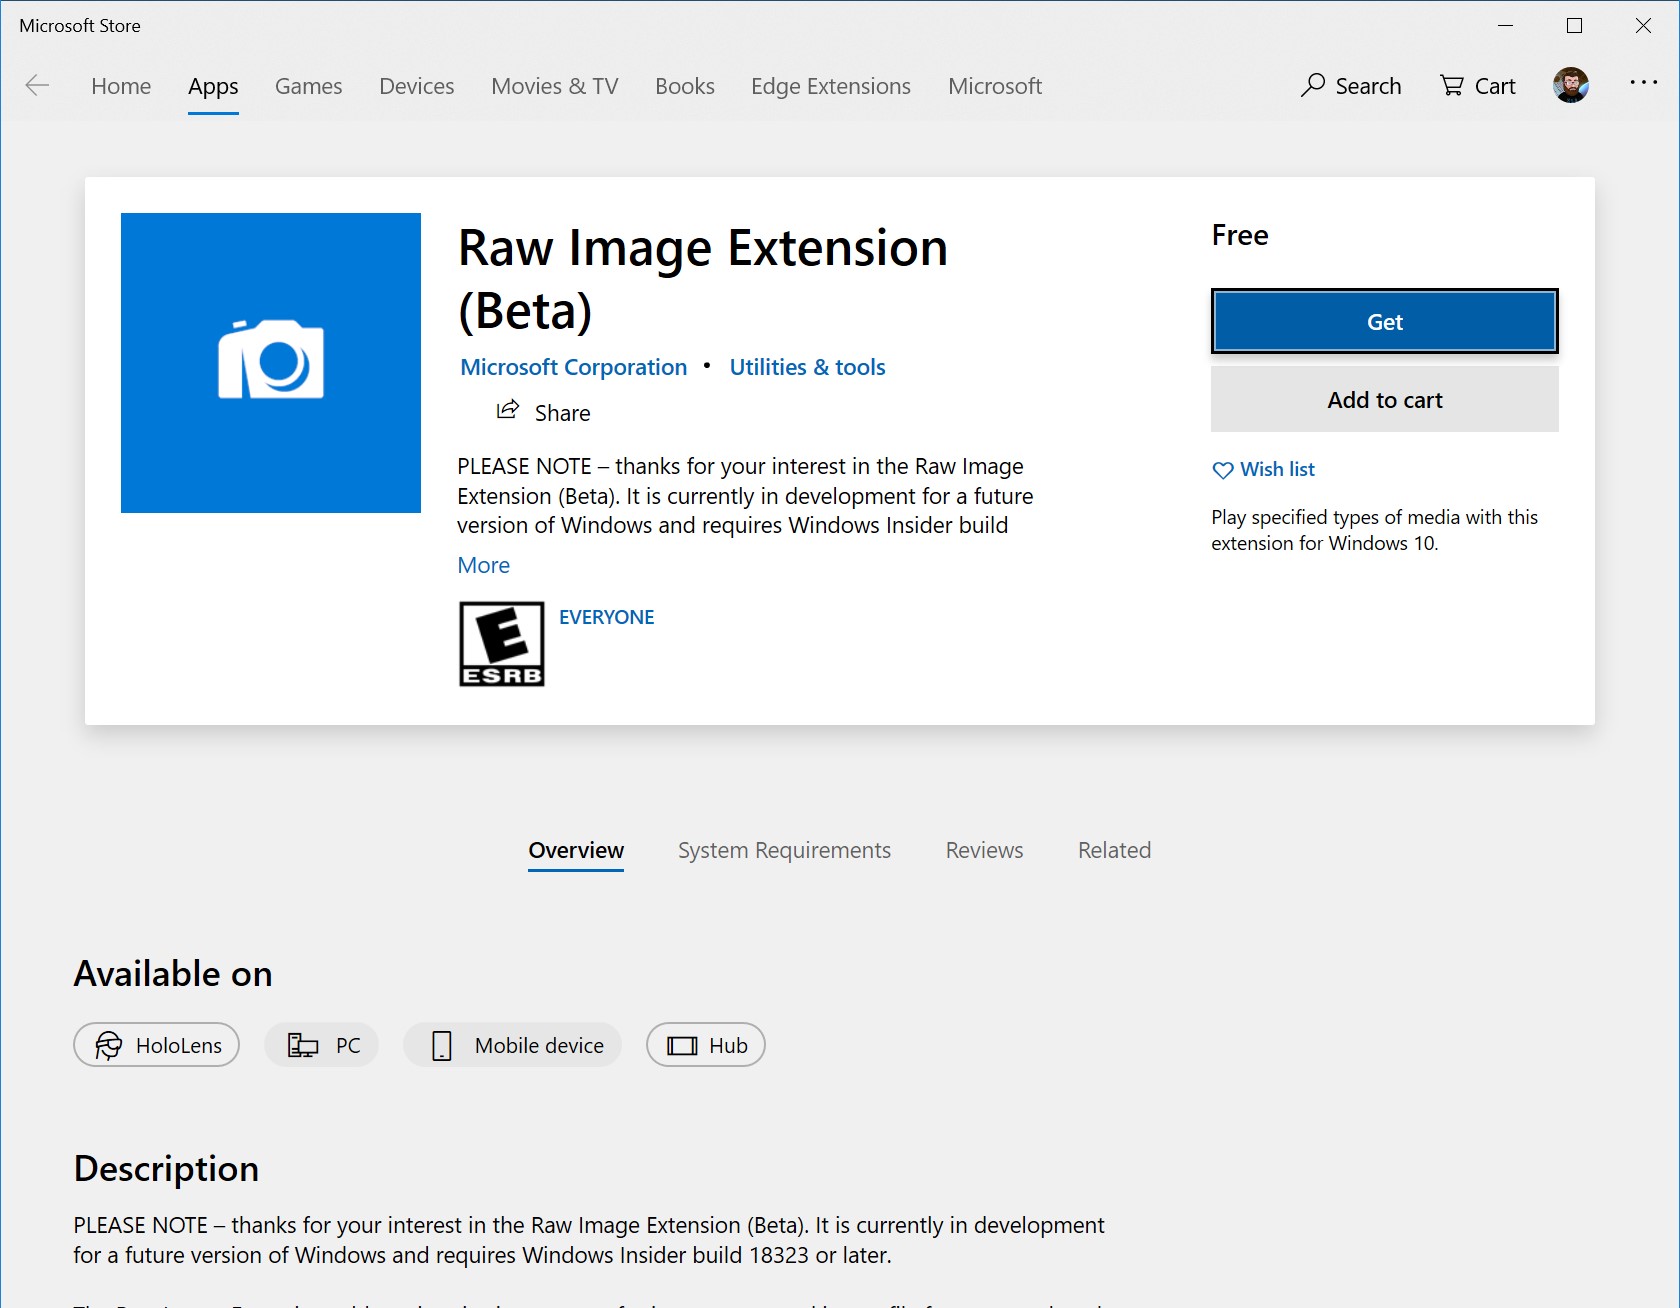 The new Raw Image Extension (Beta) package in the Microsoft Store.